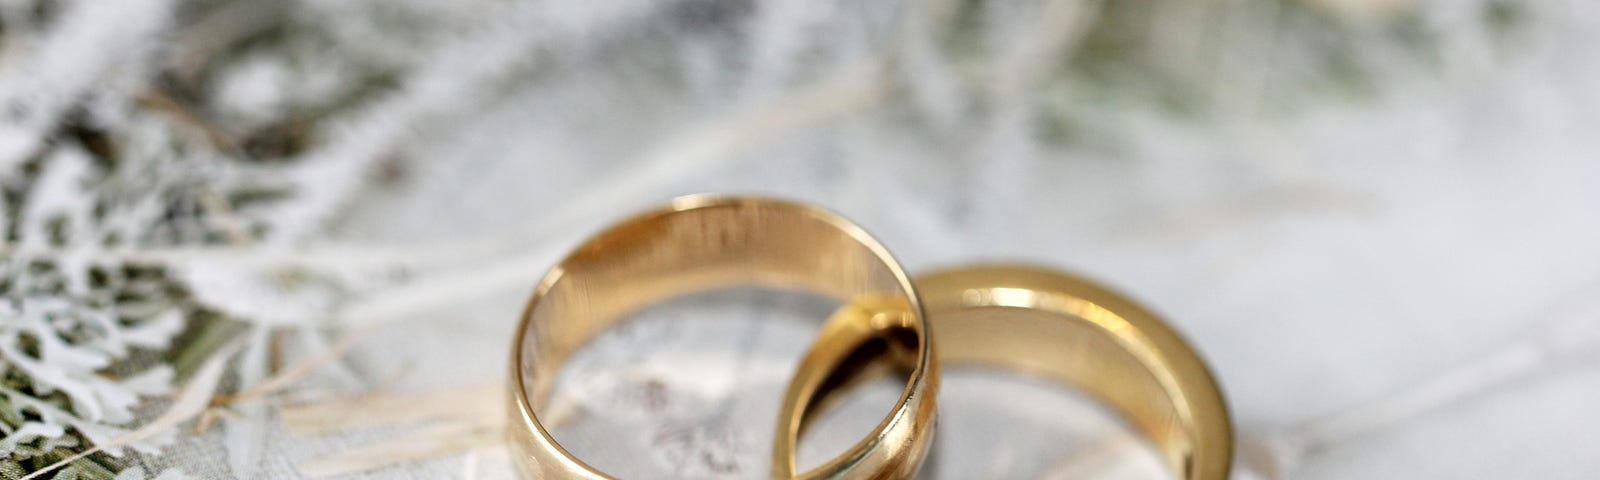 2 gold rings for marriage